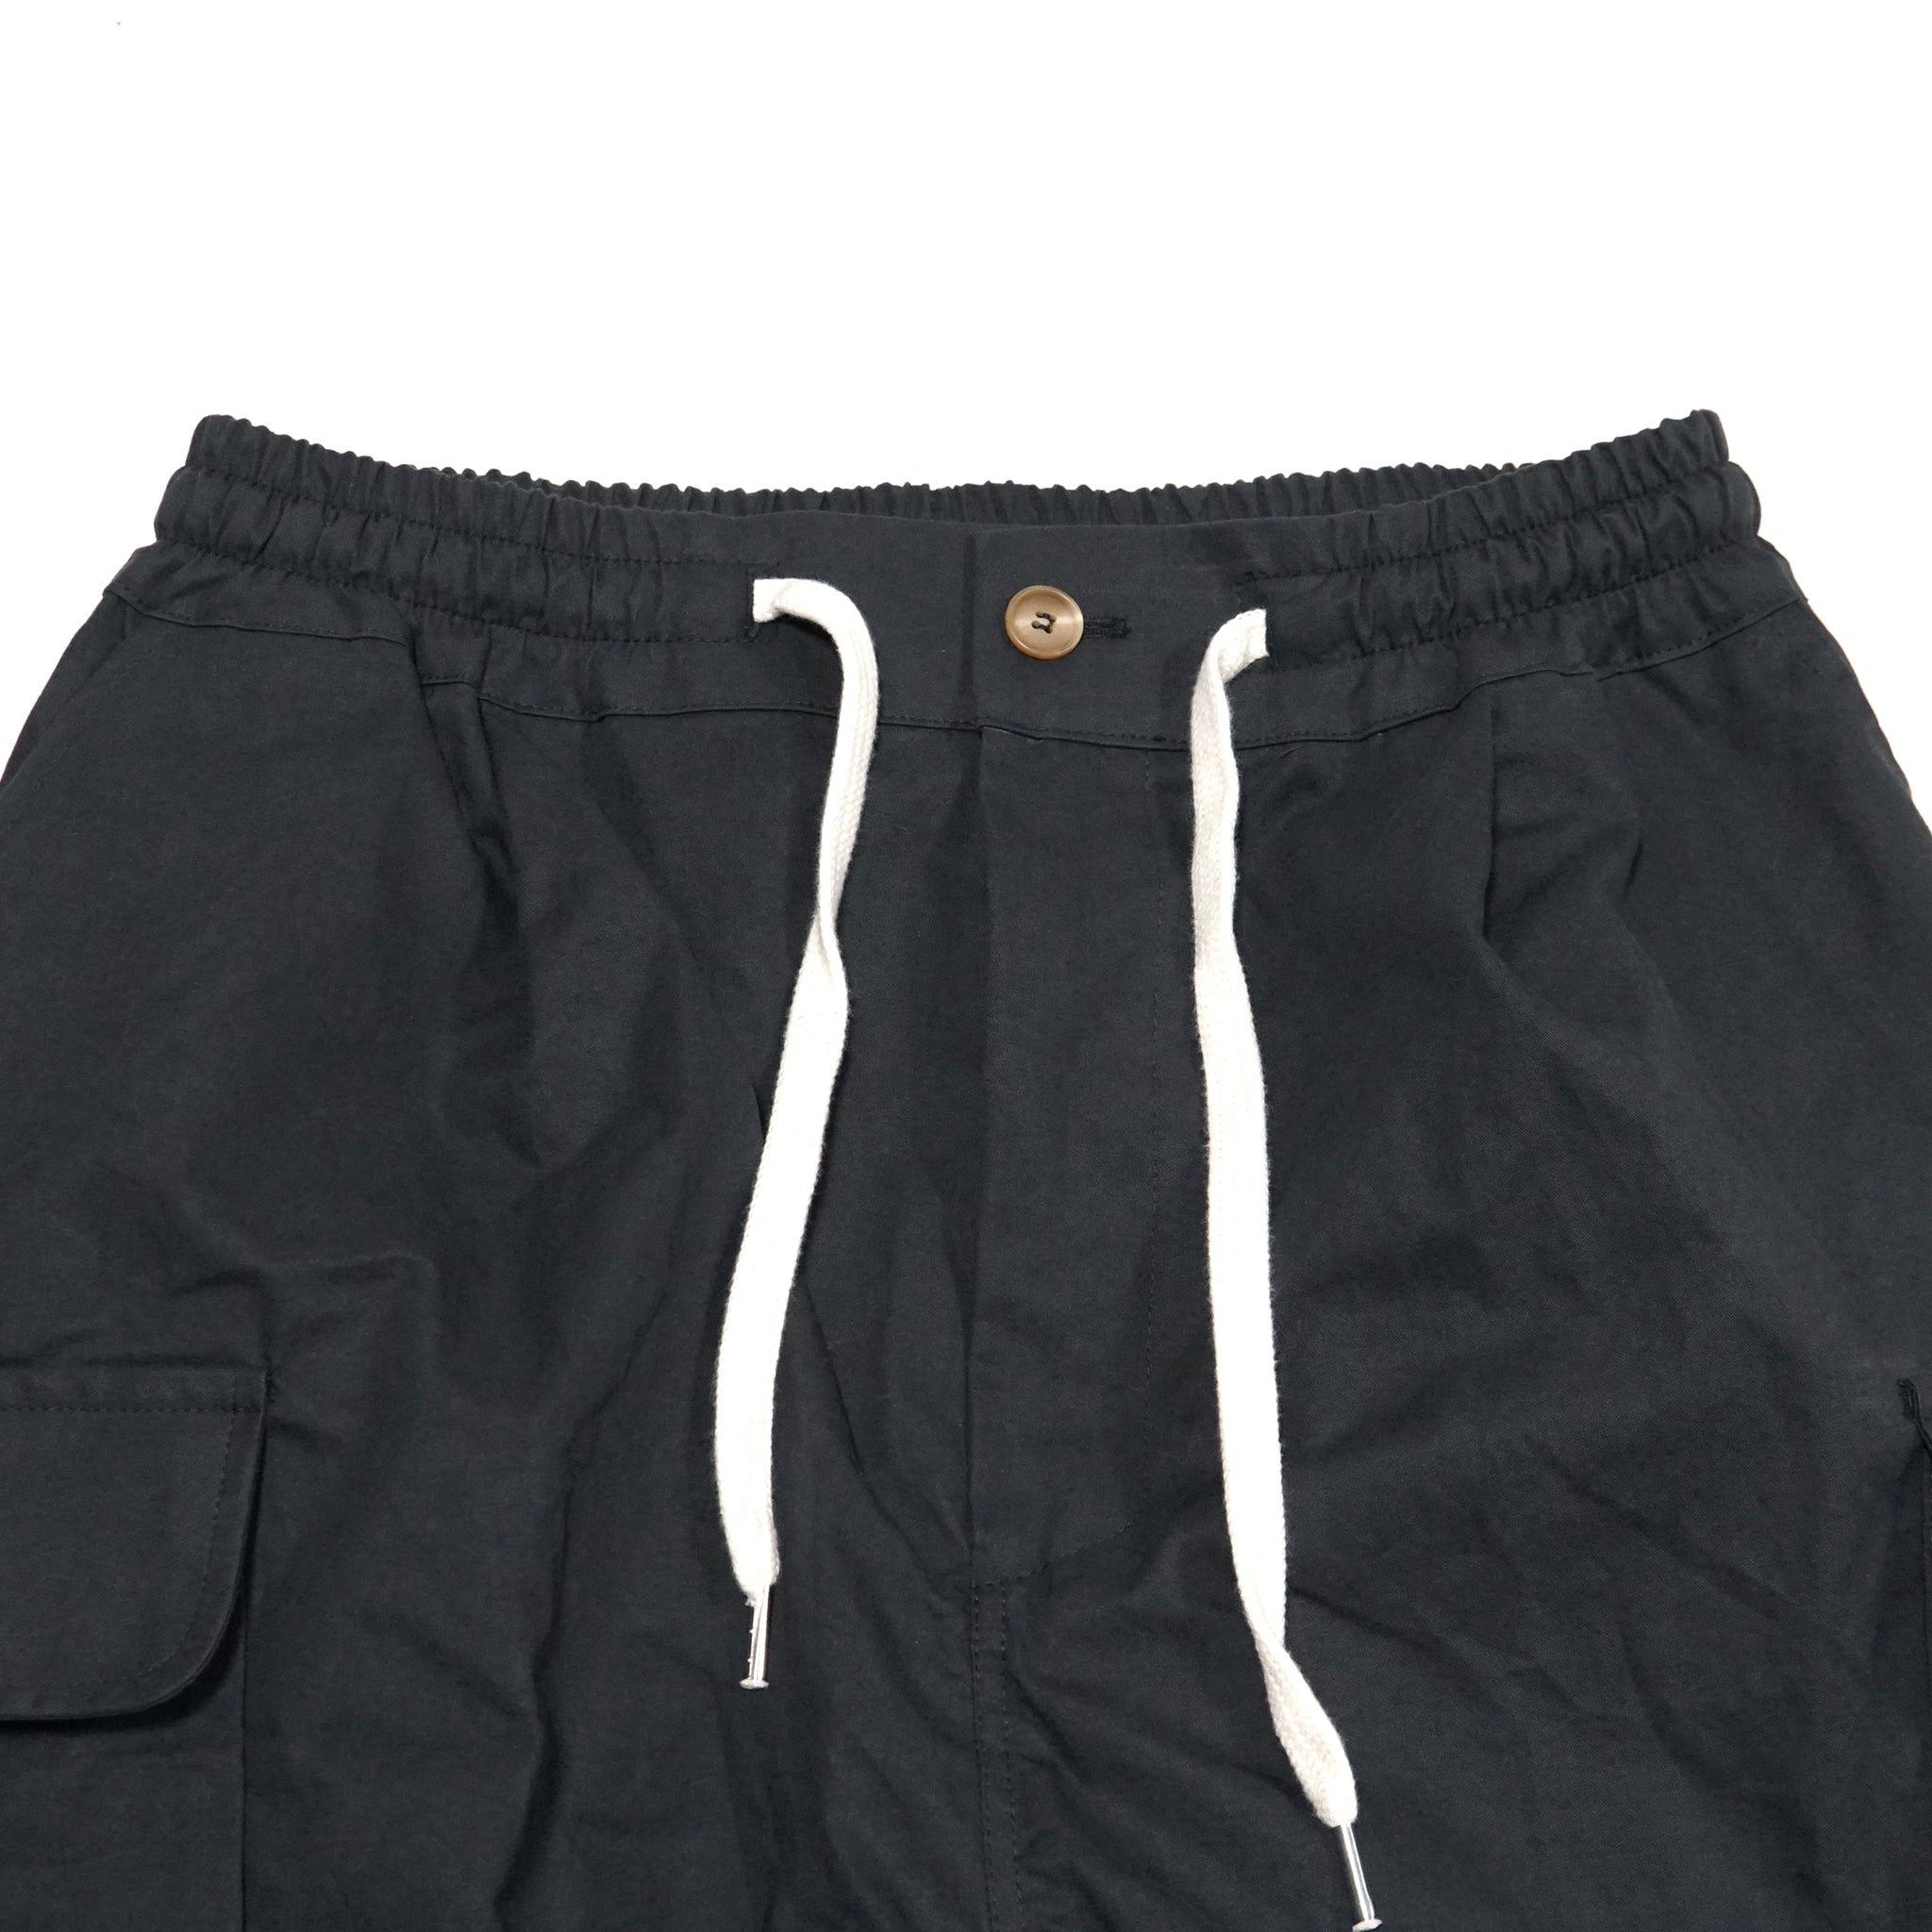 No:cbwidep | Name:Cb WIDE CARGOPANTS| Color:Black/Airforce【CONICHIWA BONJOUR_コニチワボンジュール】